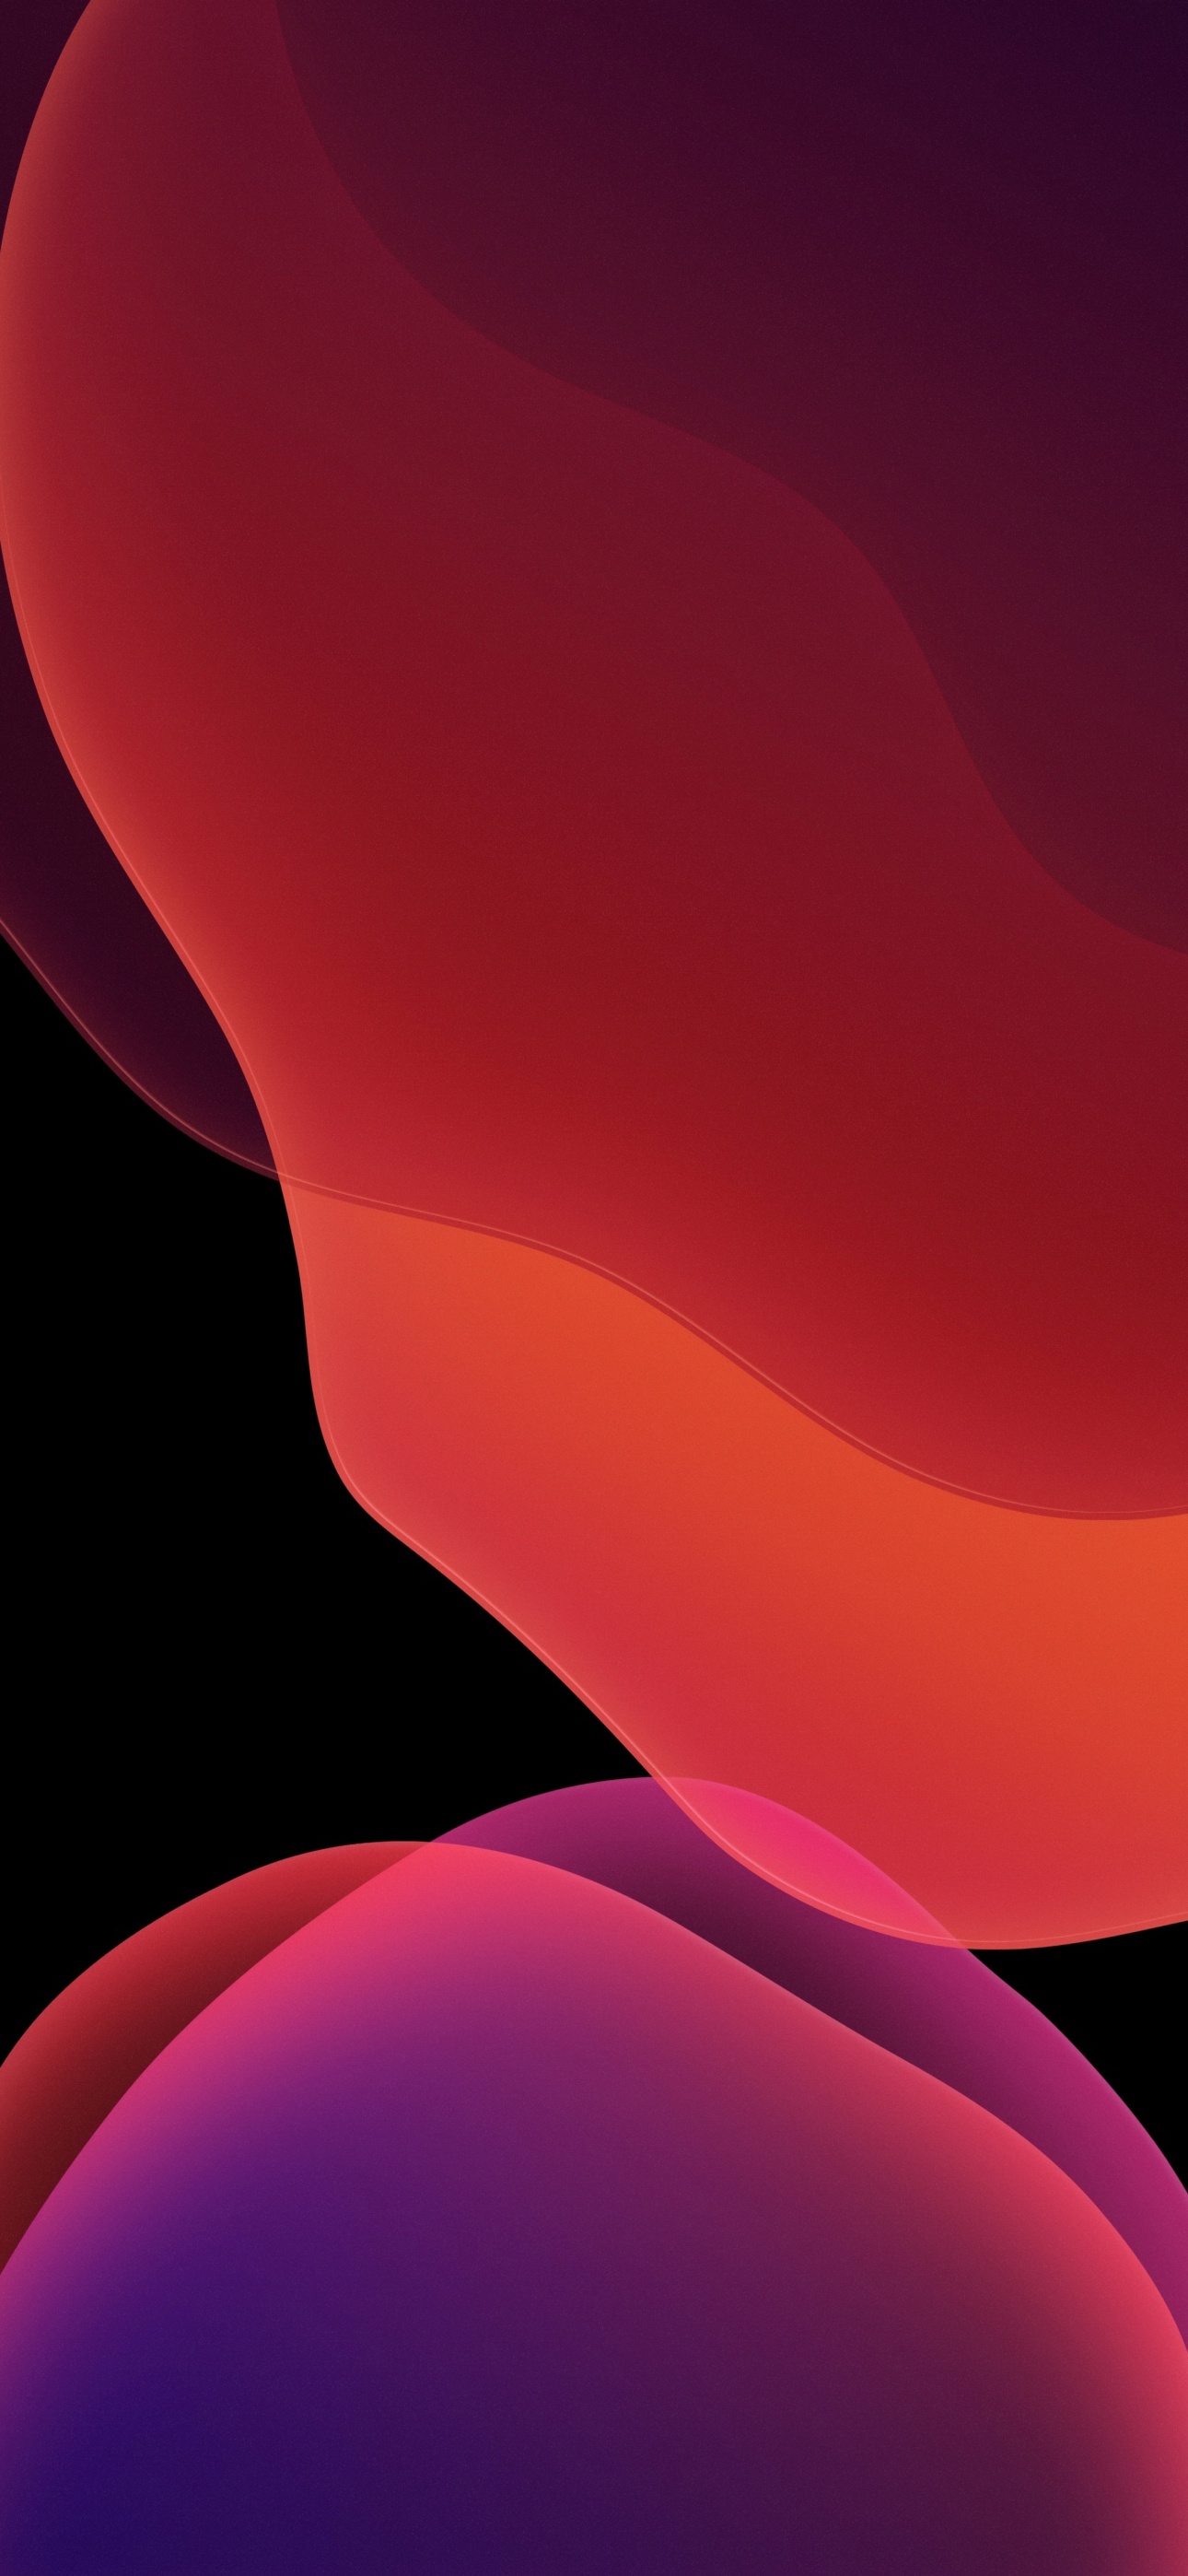 Download All 15 New iOS 9 Wallpapers Introduced In Beta 5 | Redmond Pie